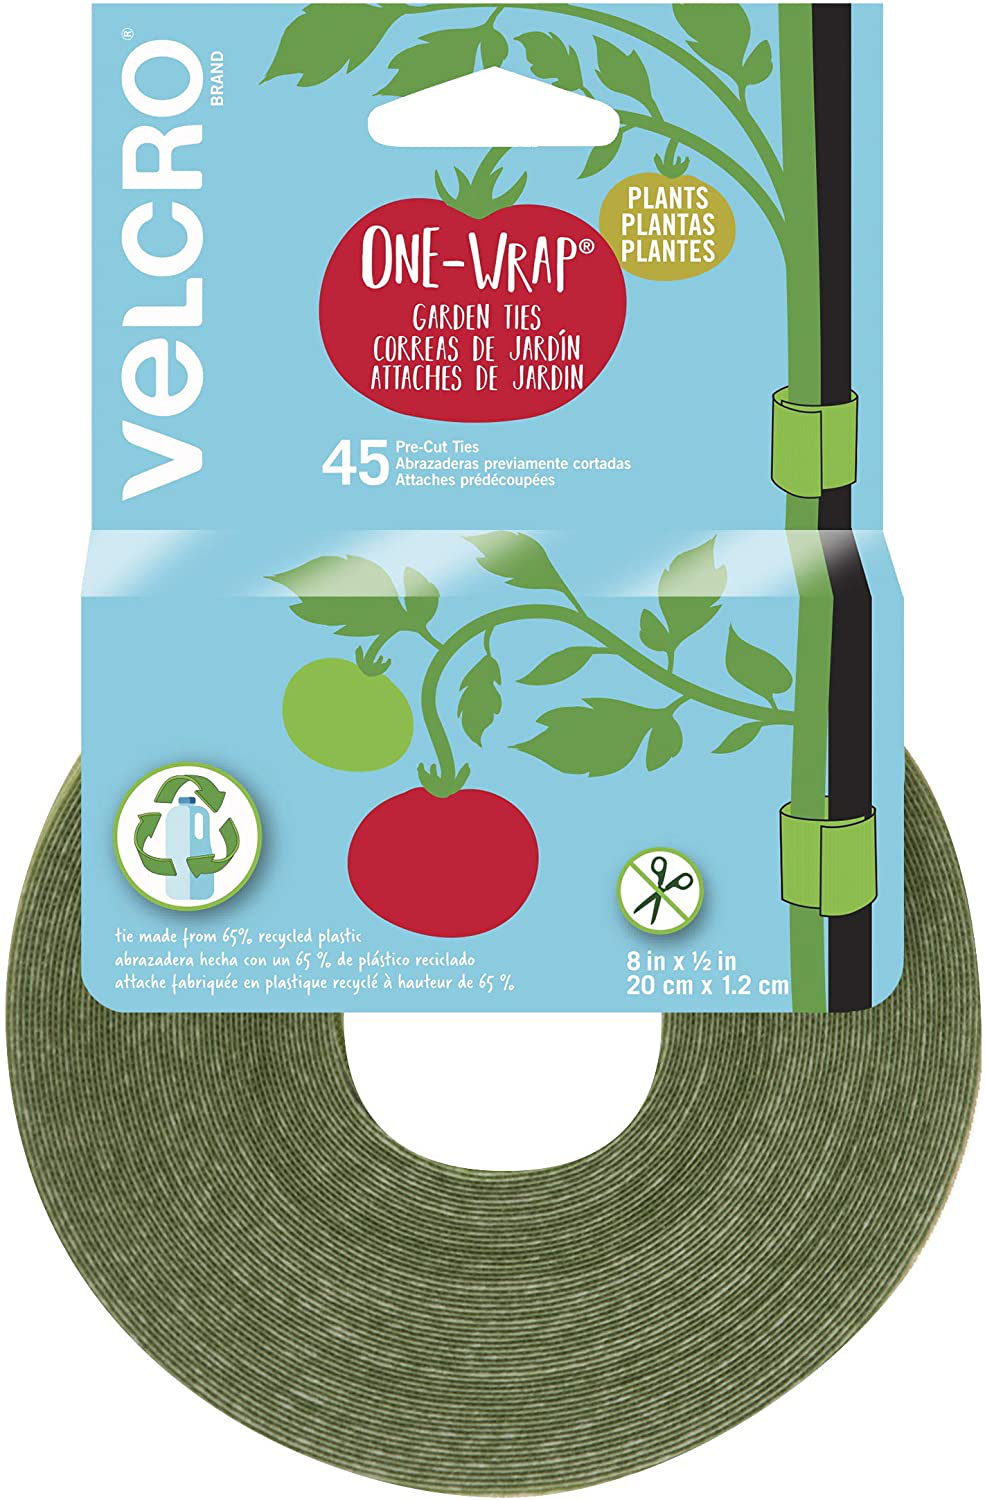 VELCRO Brand VEL-30071-USA ONE-WRAP Garden Ties | Plant Supports for Effective Growing | Strong Grips are Reusable and Adjustable | Cut-to-Length, 50 ft x 1/2 in, Green-Recycled Plastic